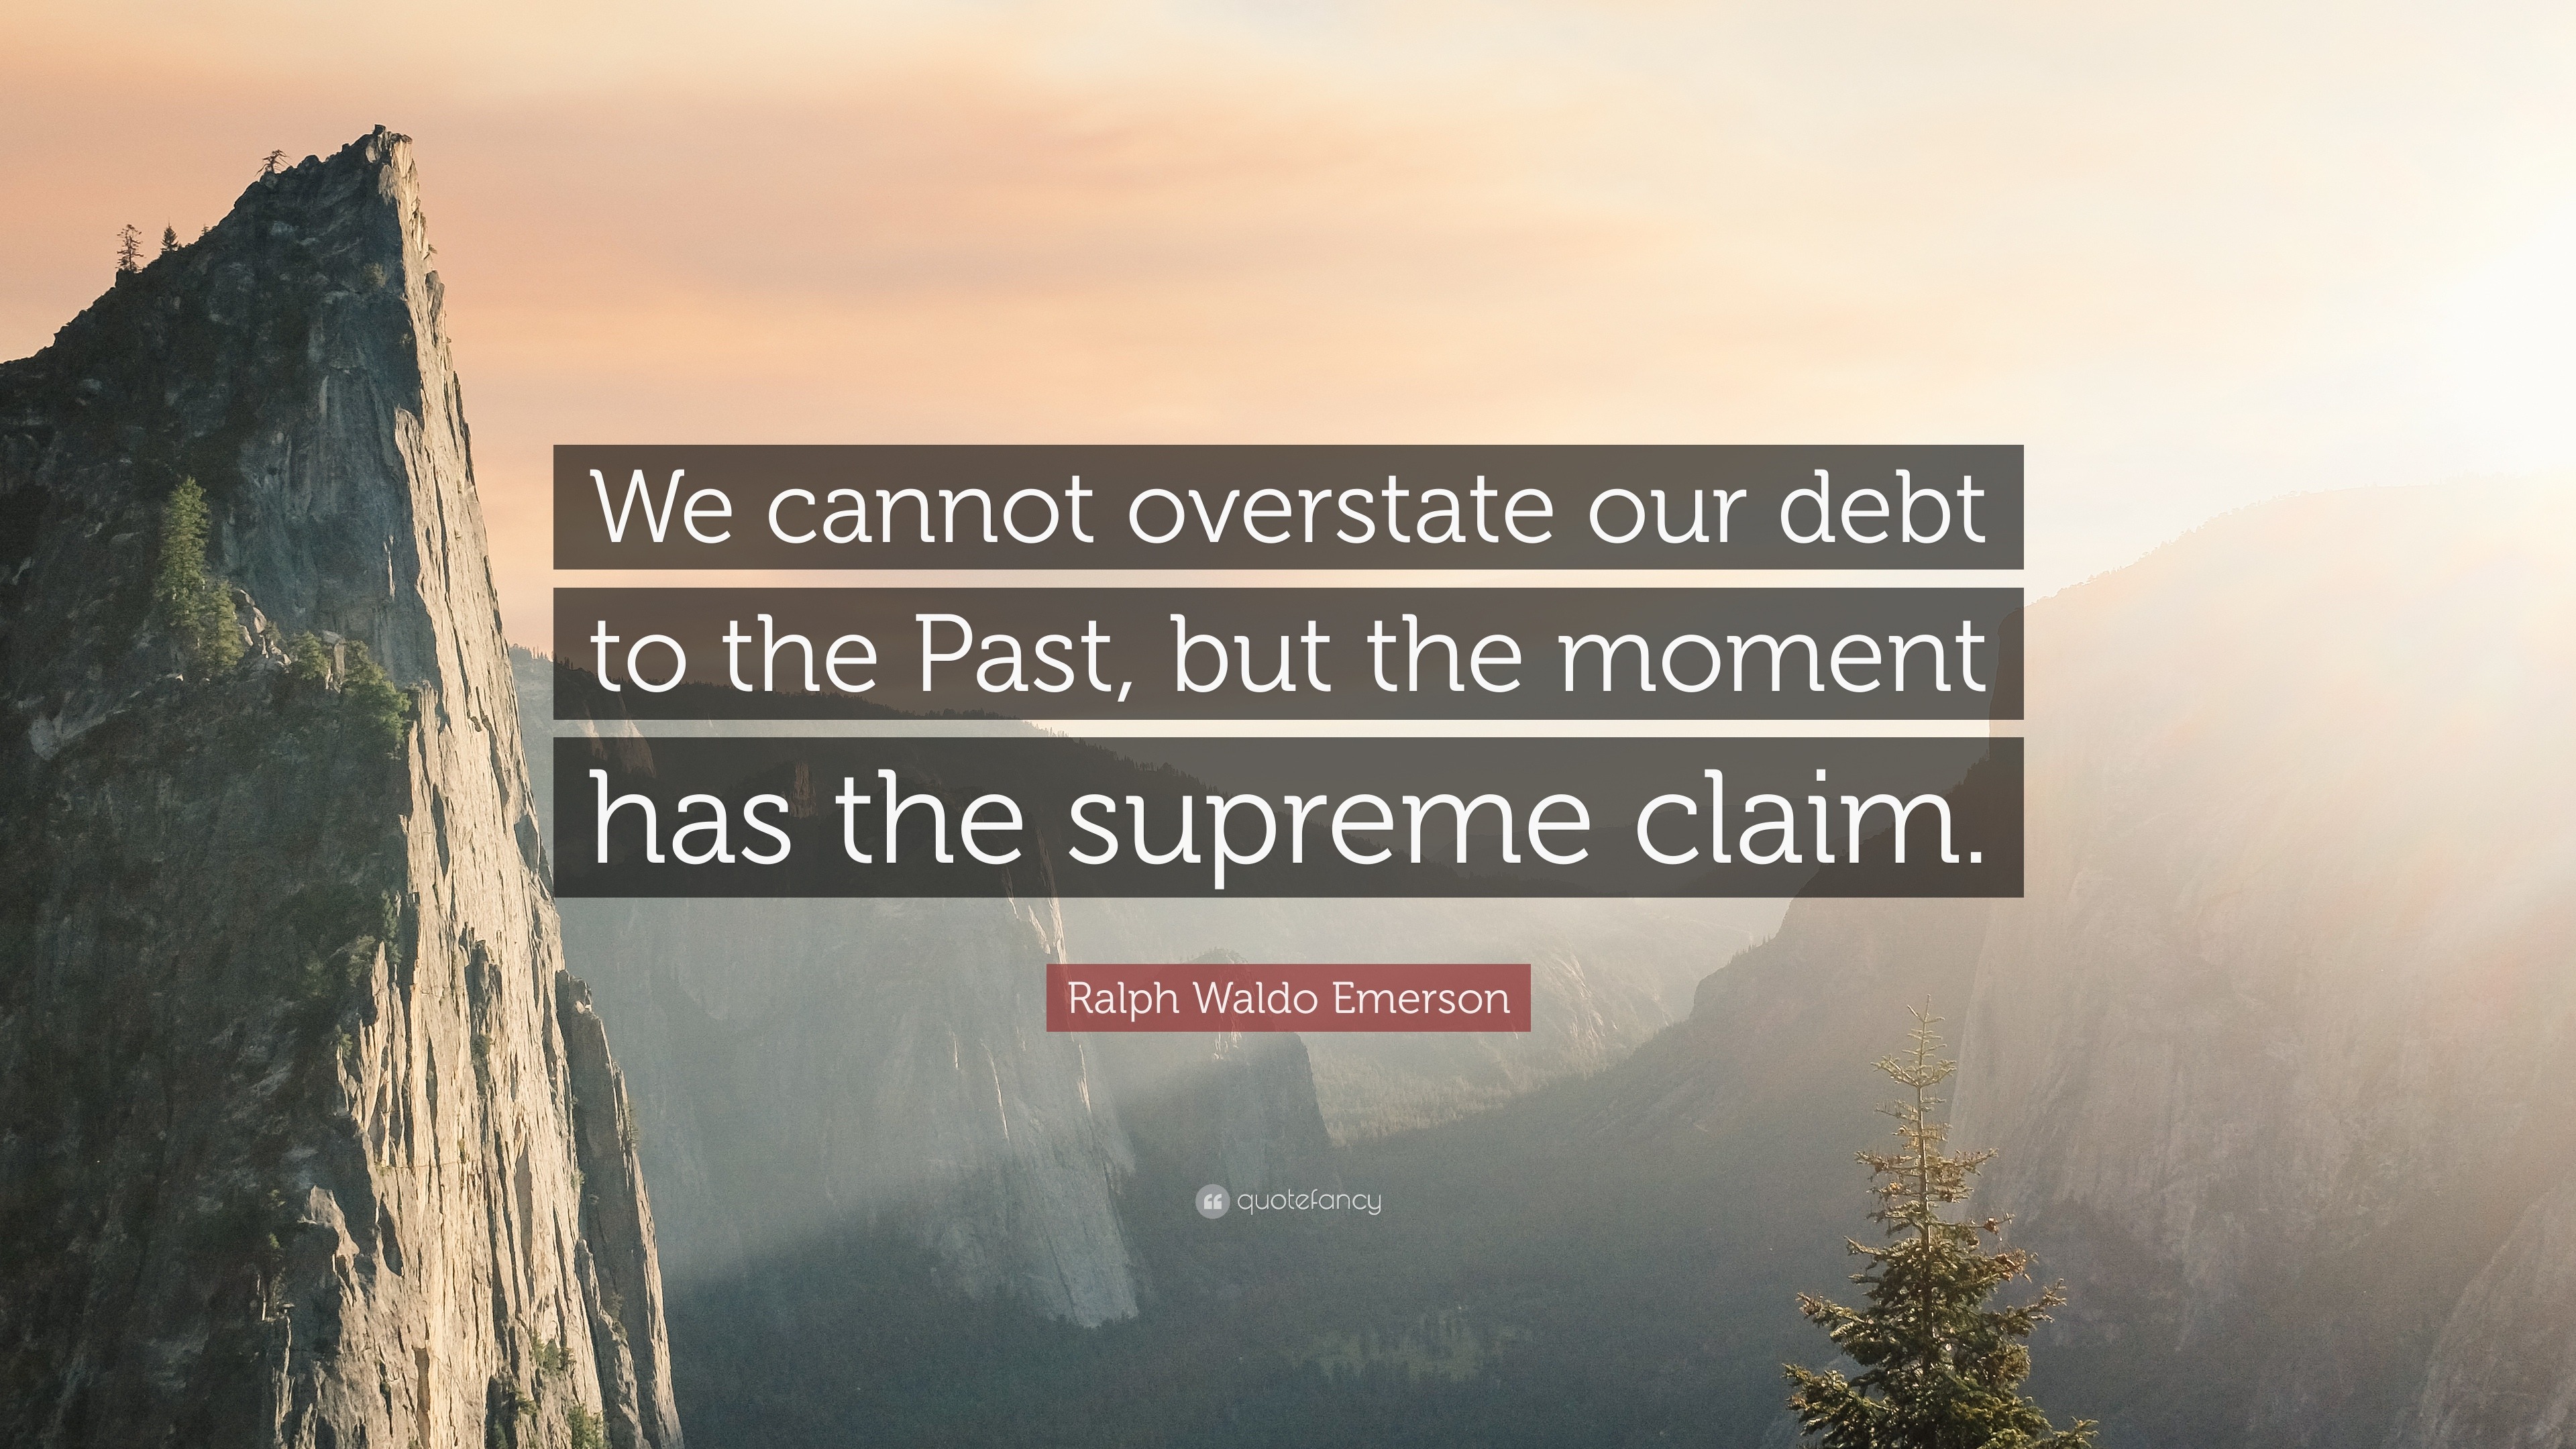 Ralph Waldo Emerson Quote “we Cannot Overstate Our Debt To The Past But The Moment Has The